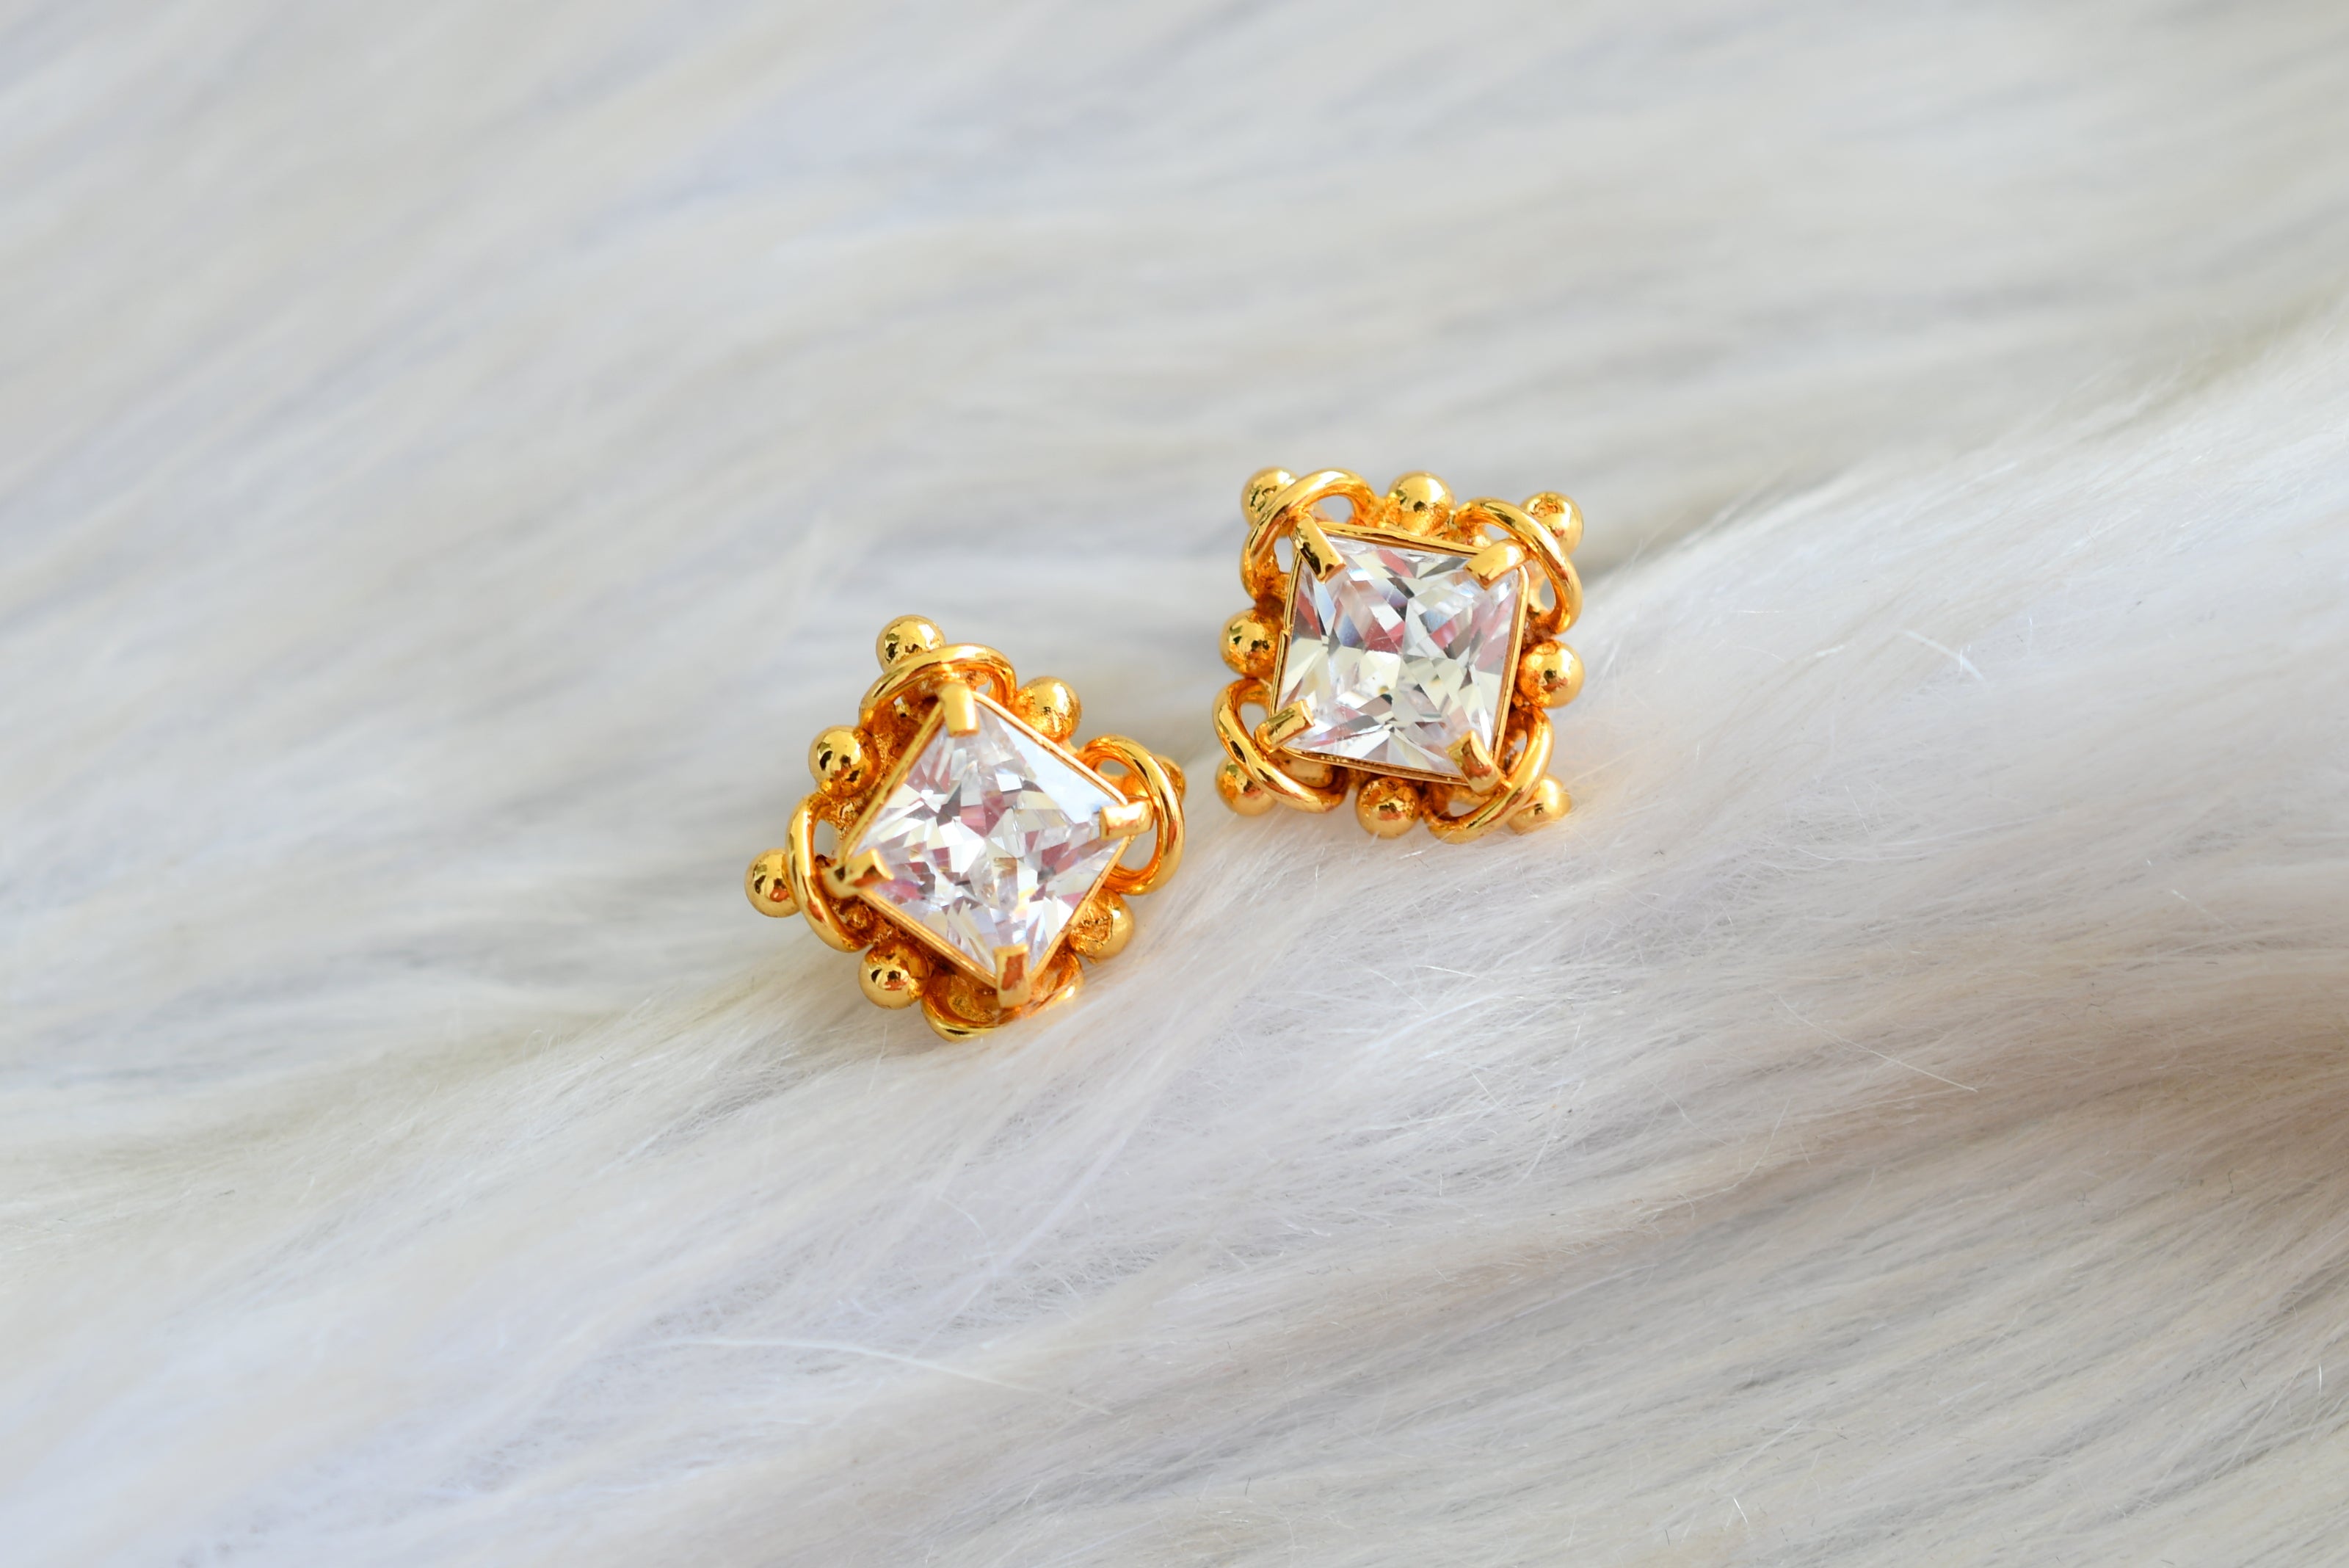 fcity.in - Natural Semi Precious Stone Earring / Unique Earrings Studs